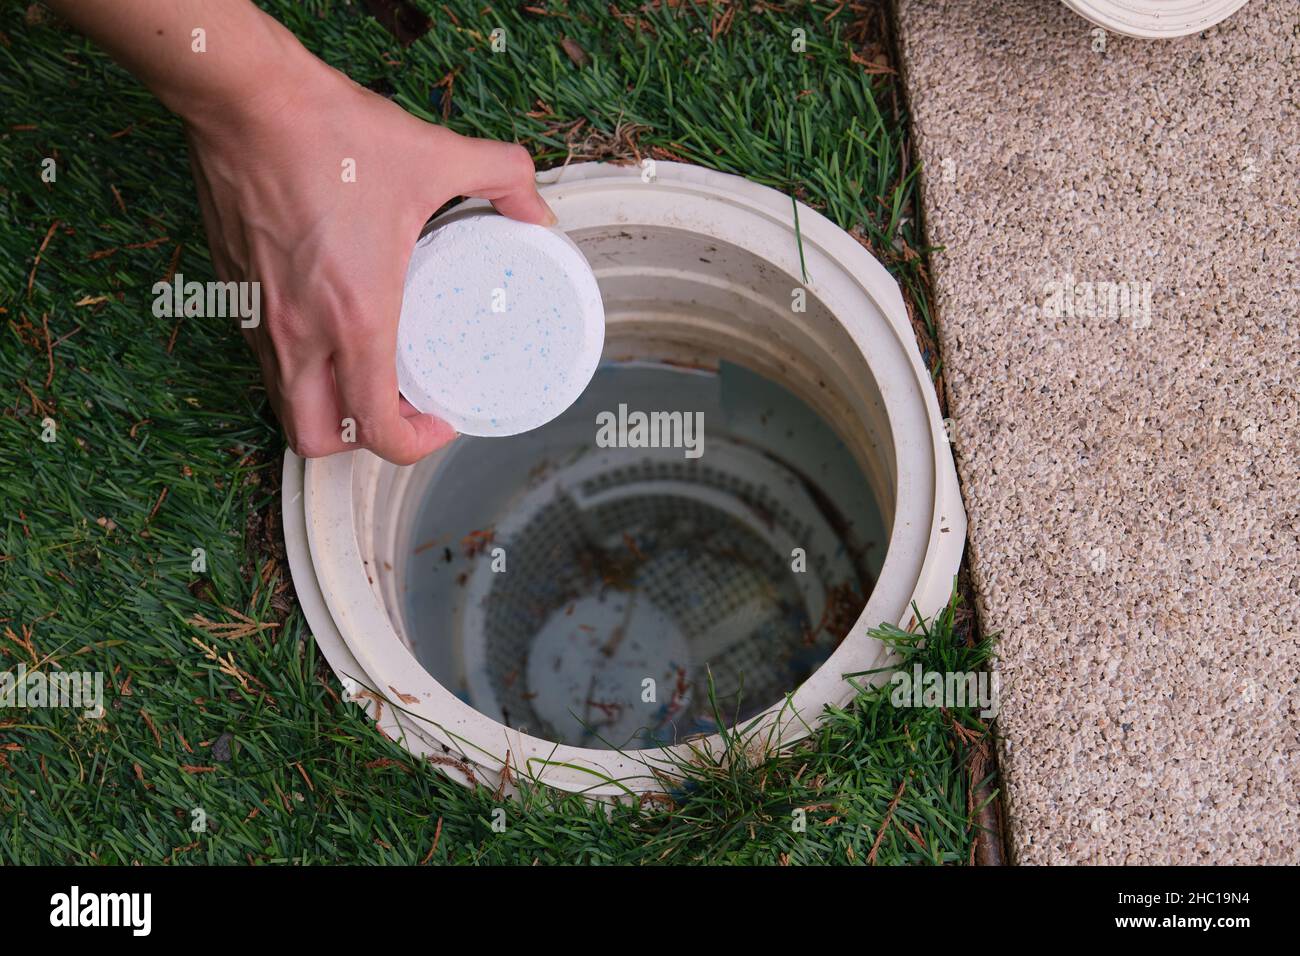 Woman hand putting a chlorine tablet into the pool skimmer. Stock Photo